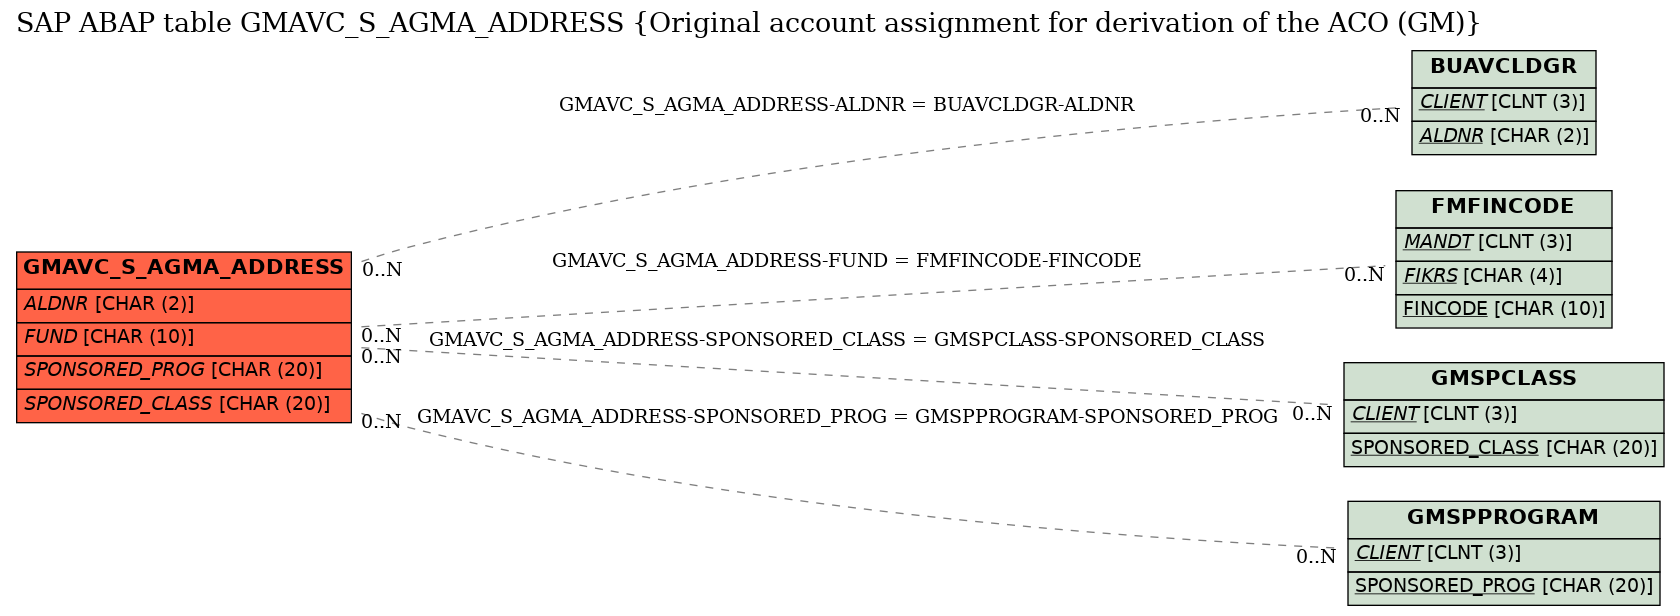 E-R Diagram for table GMAVC_S_AGMA_ADDRESS (Original account assignment for derivation of the ACO (GM))